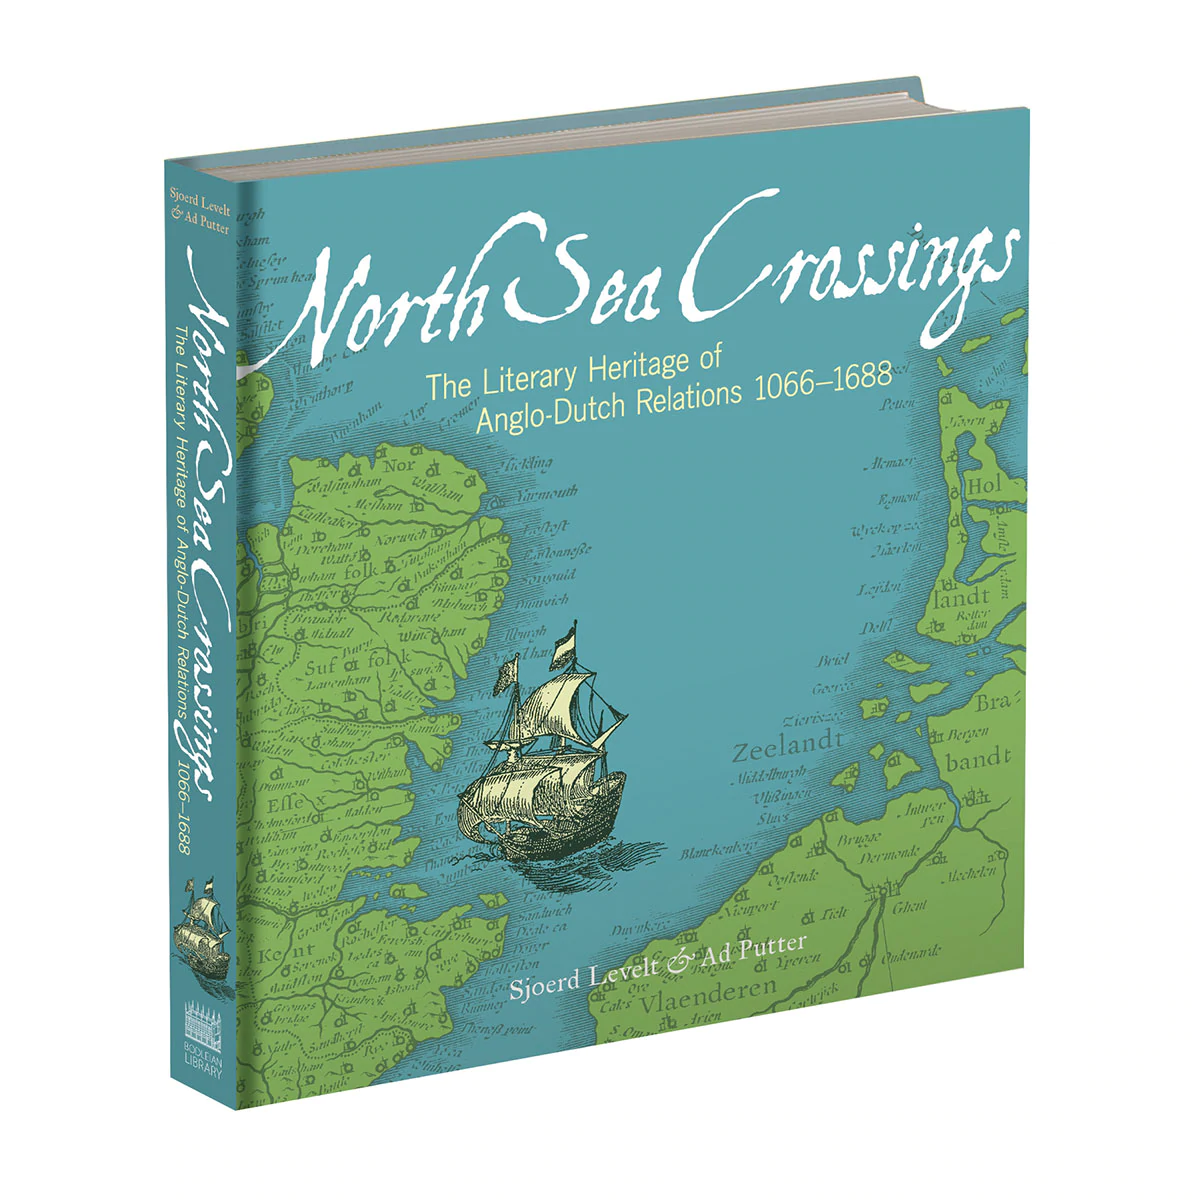 An image of the North Sea Crossing exhibition book